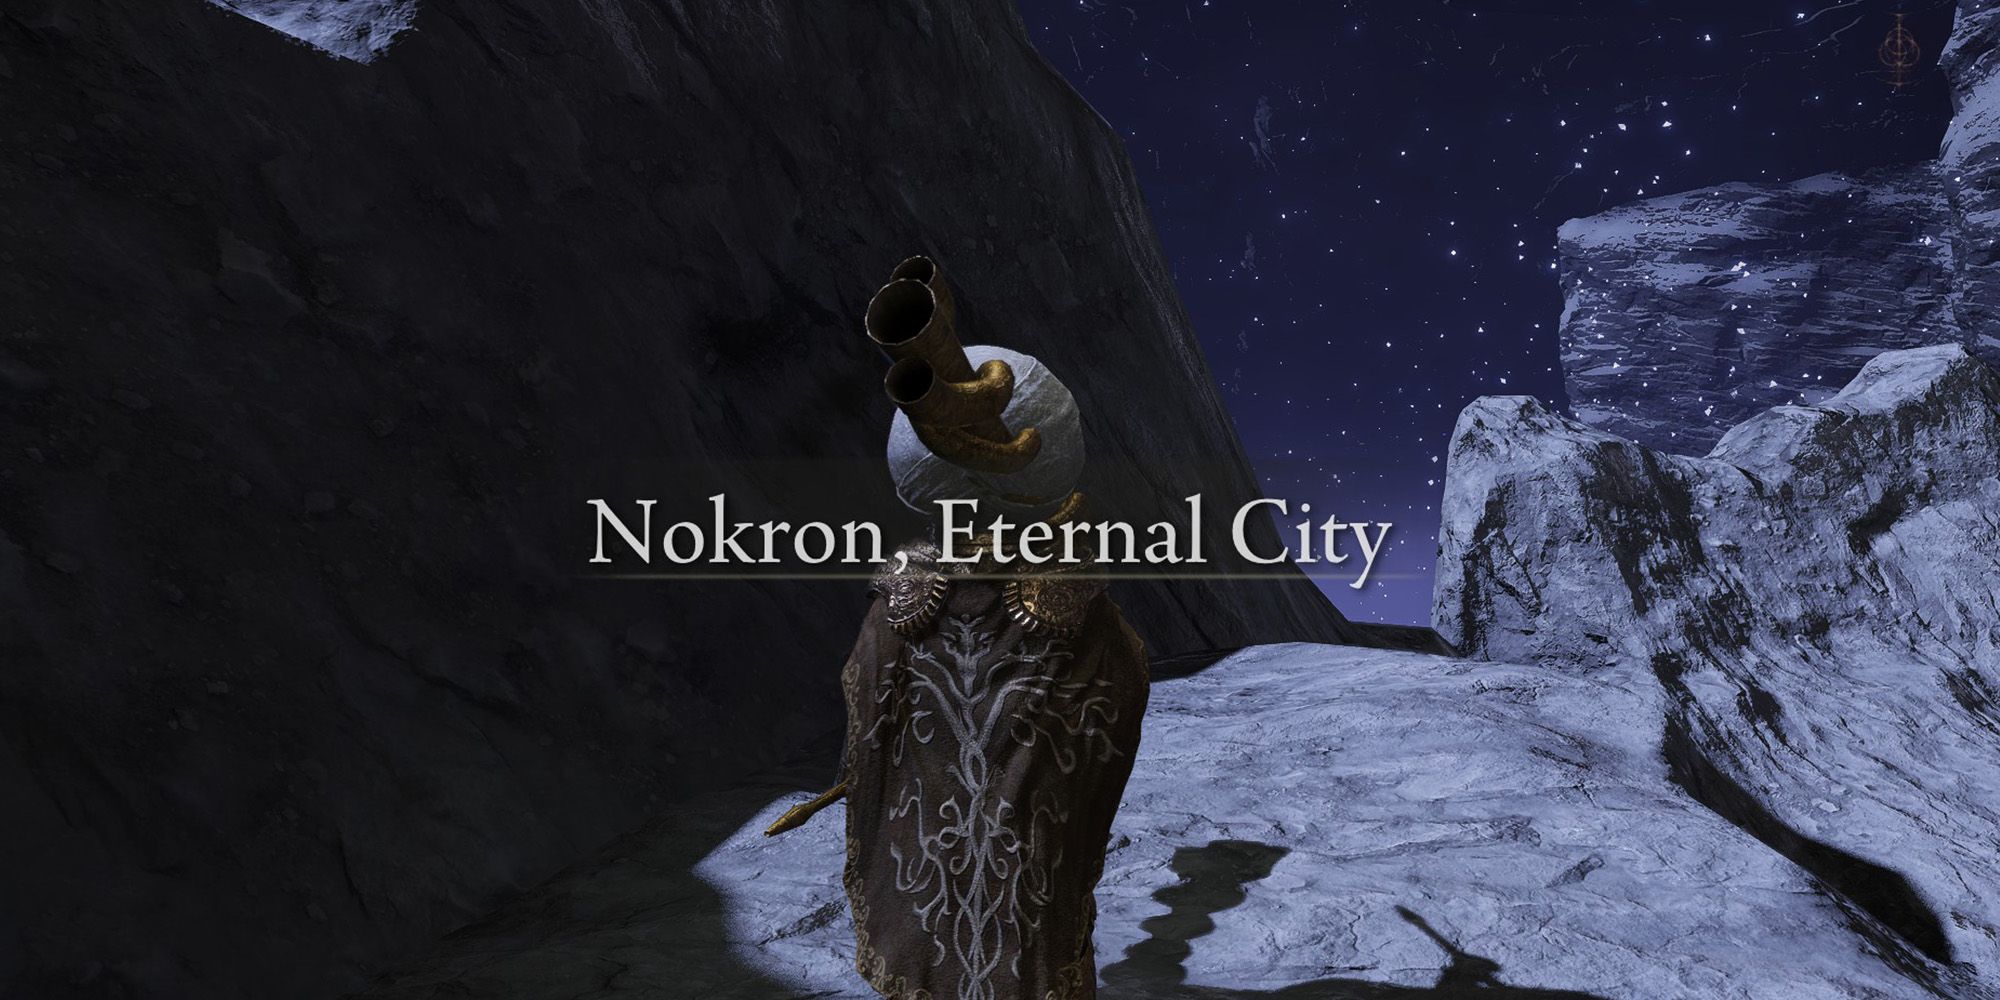 Guide to Nokron, Eternal City in 